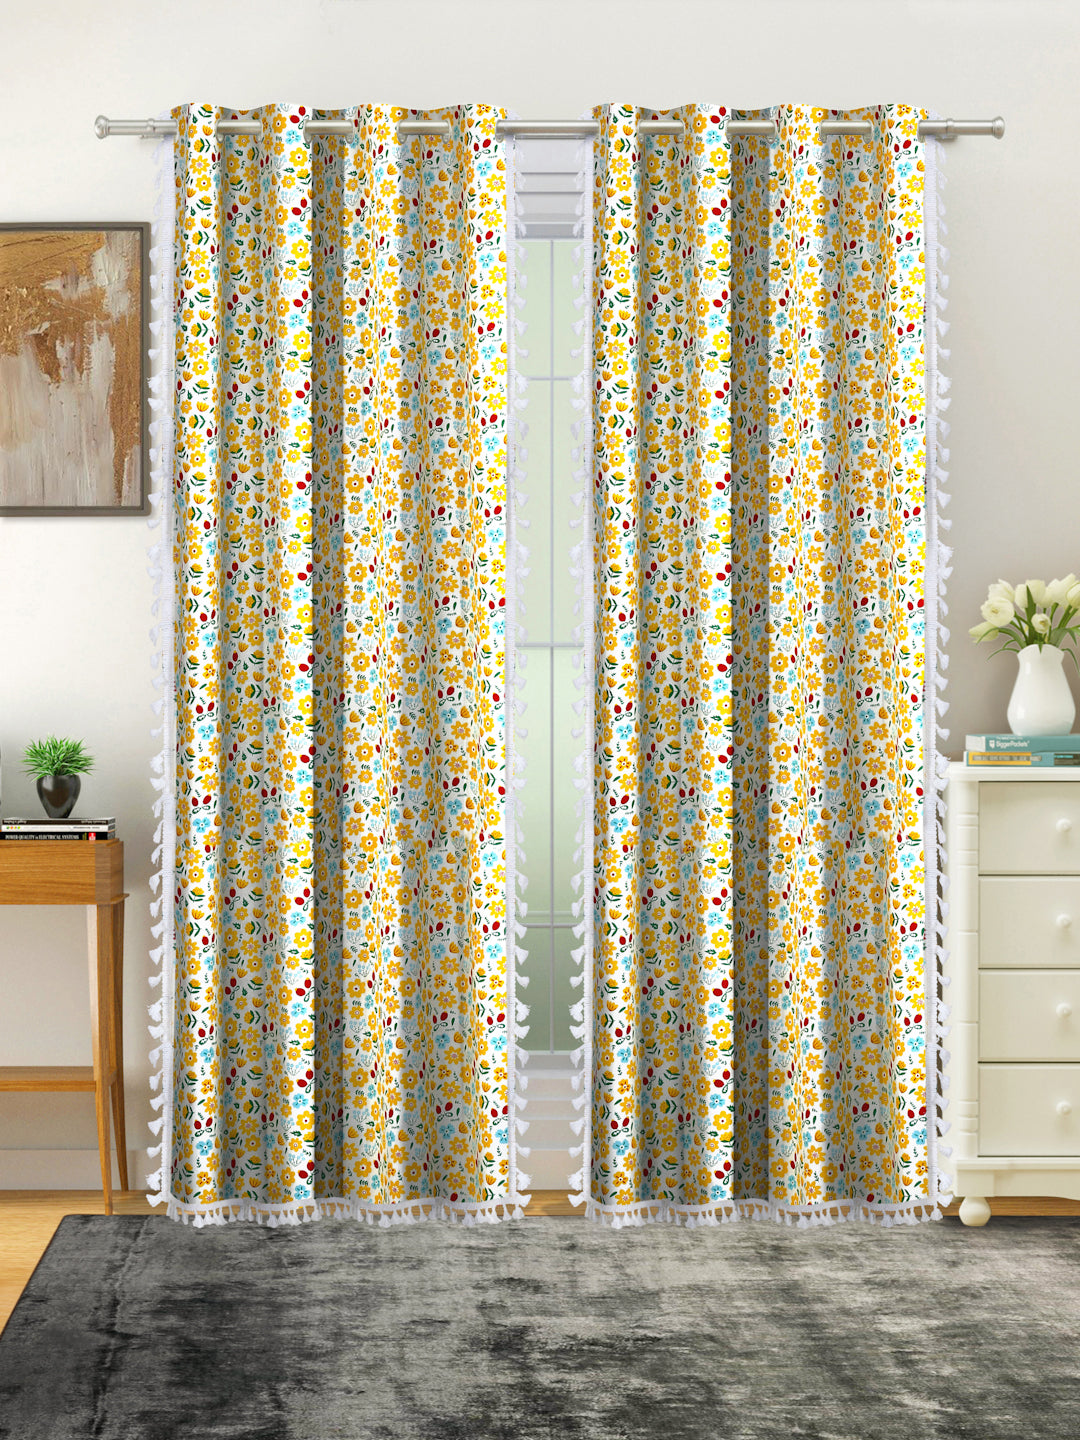 Cotton Printed Boho Light Filtering Door Curtain with Lace- Yellow (Pack of 2)